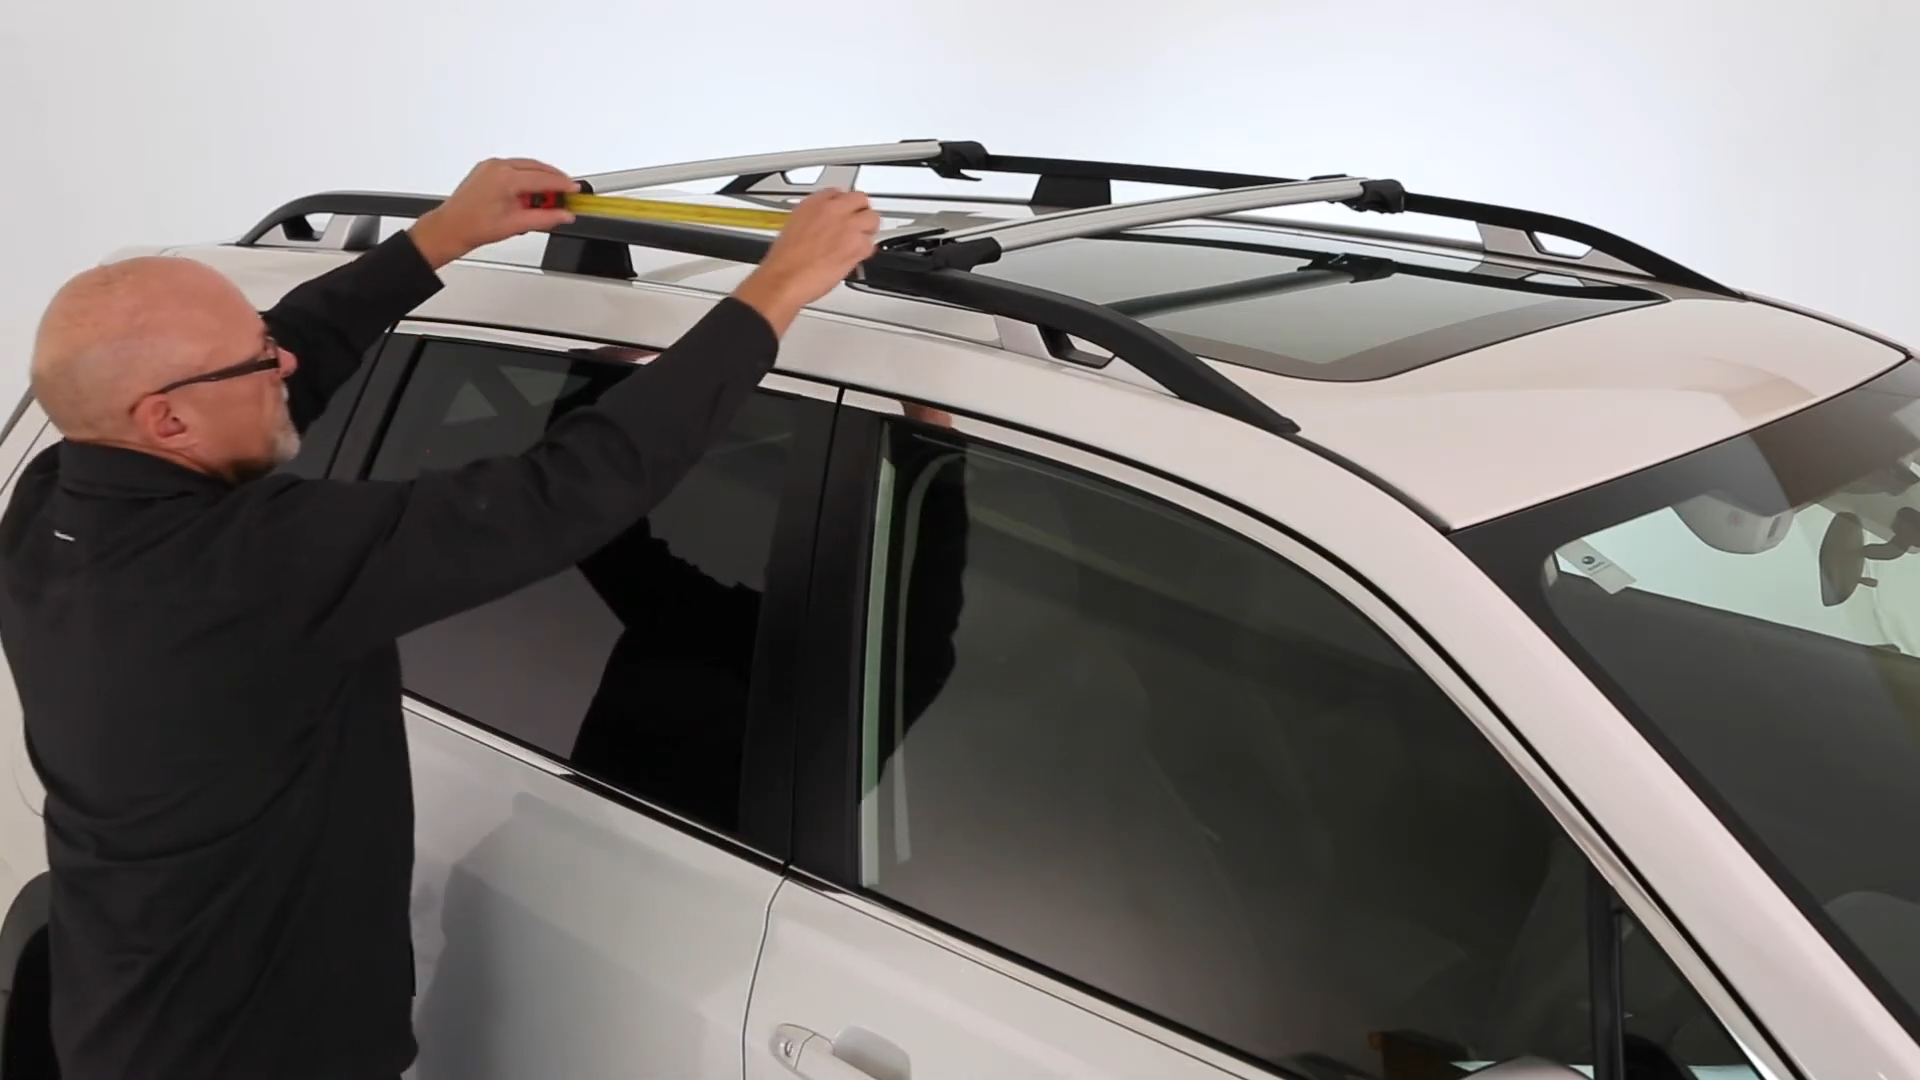 How To Install Roof Racks On A Car